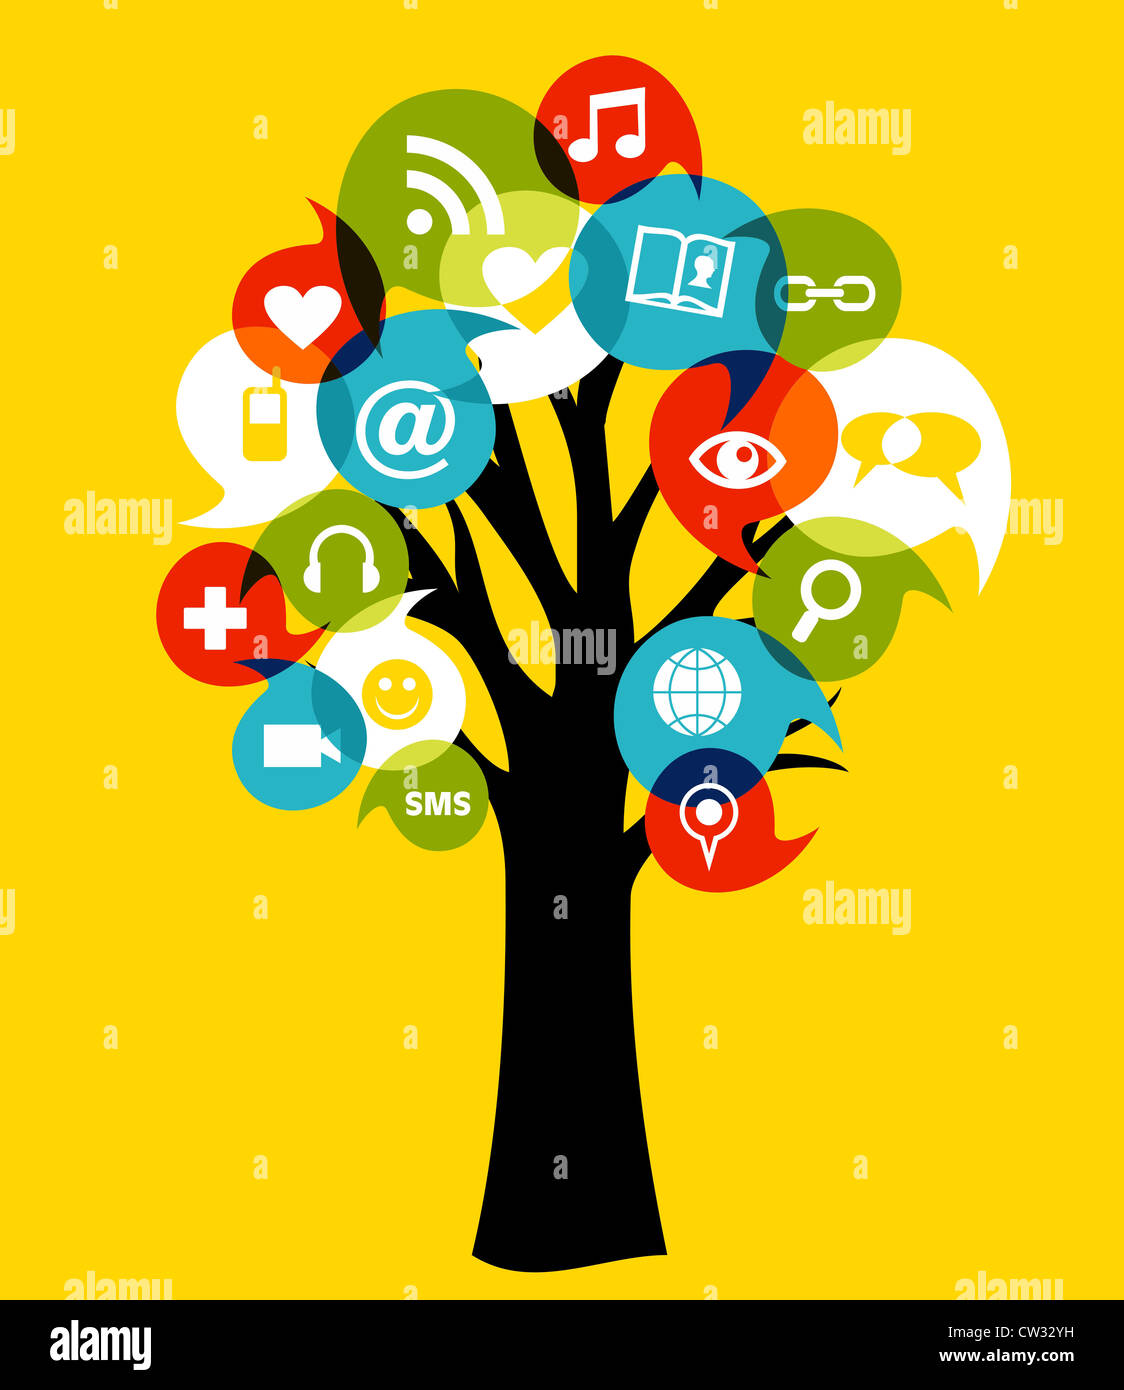 Social network tree with media icons leaf. Vector illustration layered for easy manipulation and custom coloring. Stock Photo